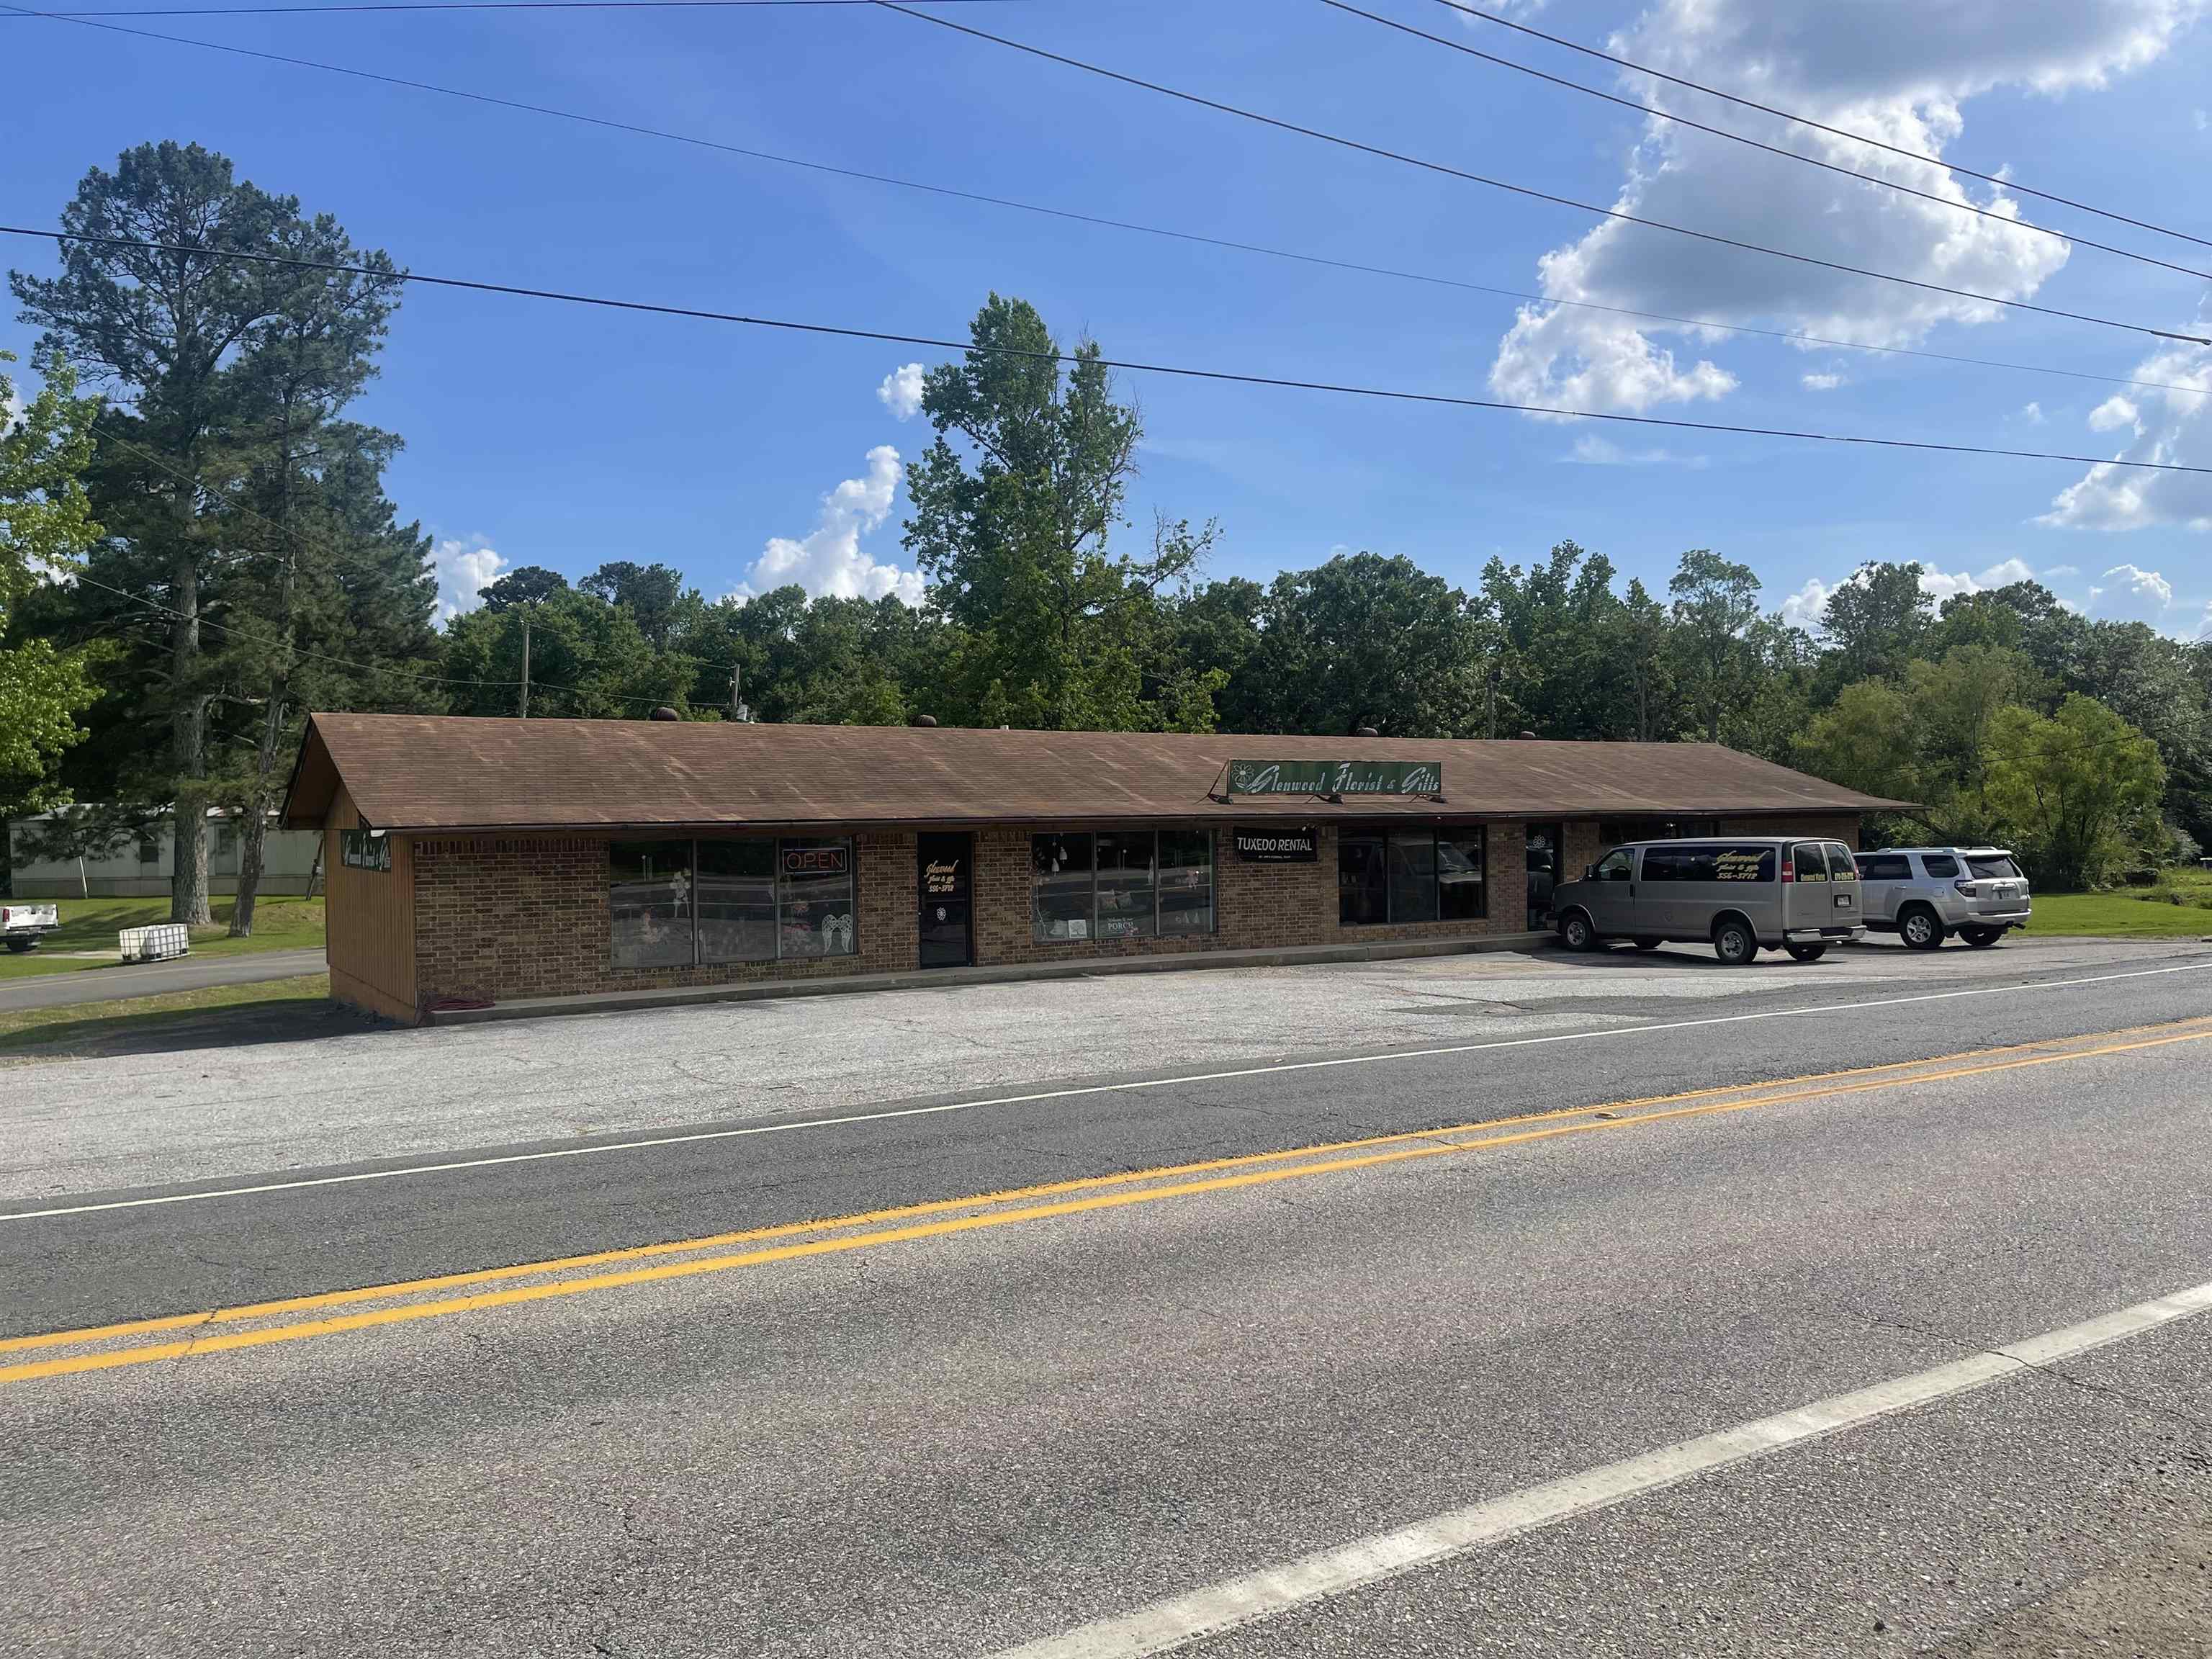 Commercial / Industrial for sale – 621 E Broadway   Glenwood, AR